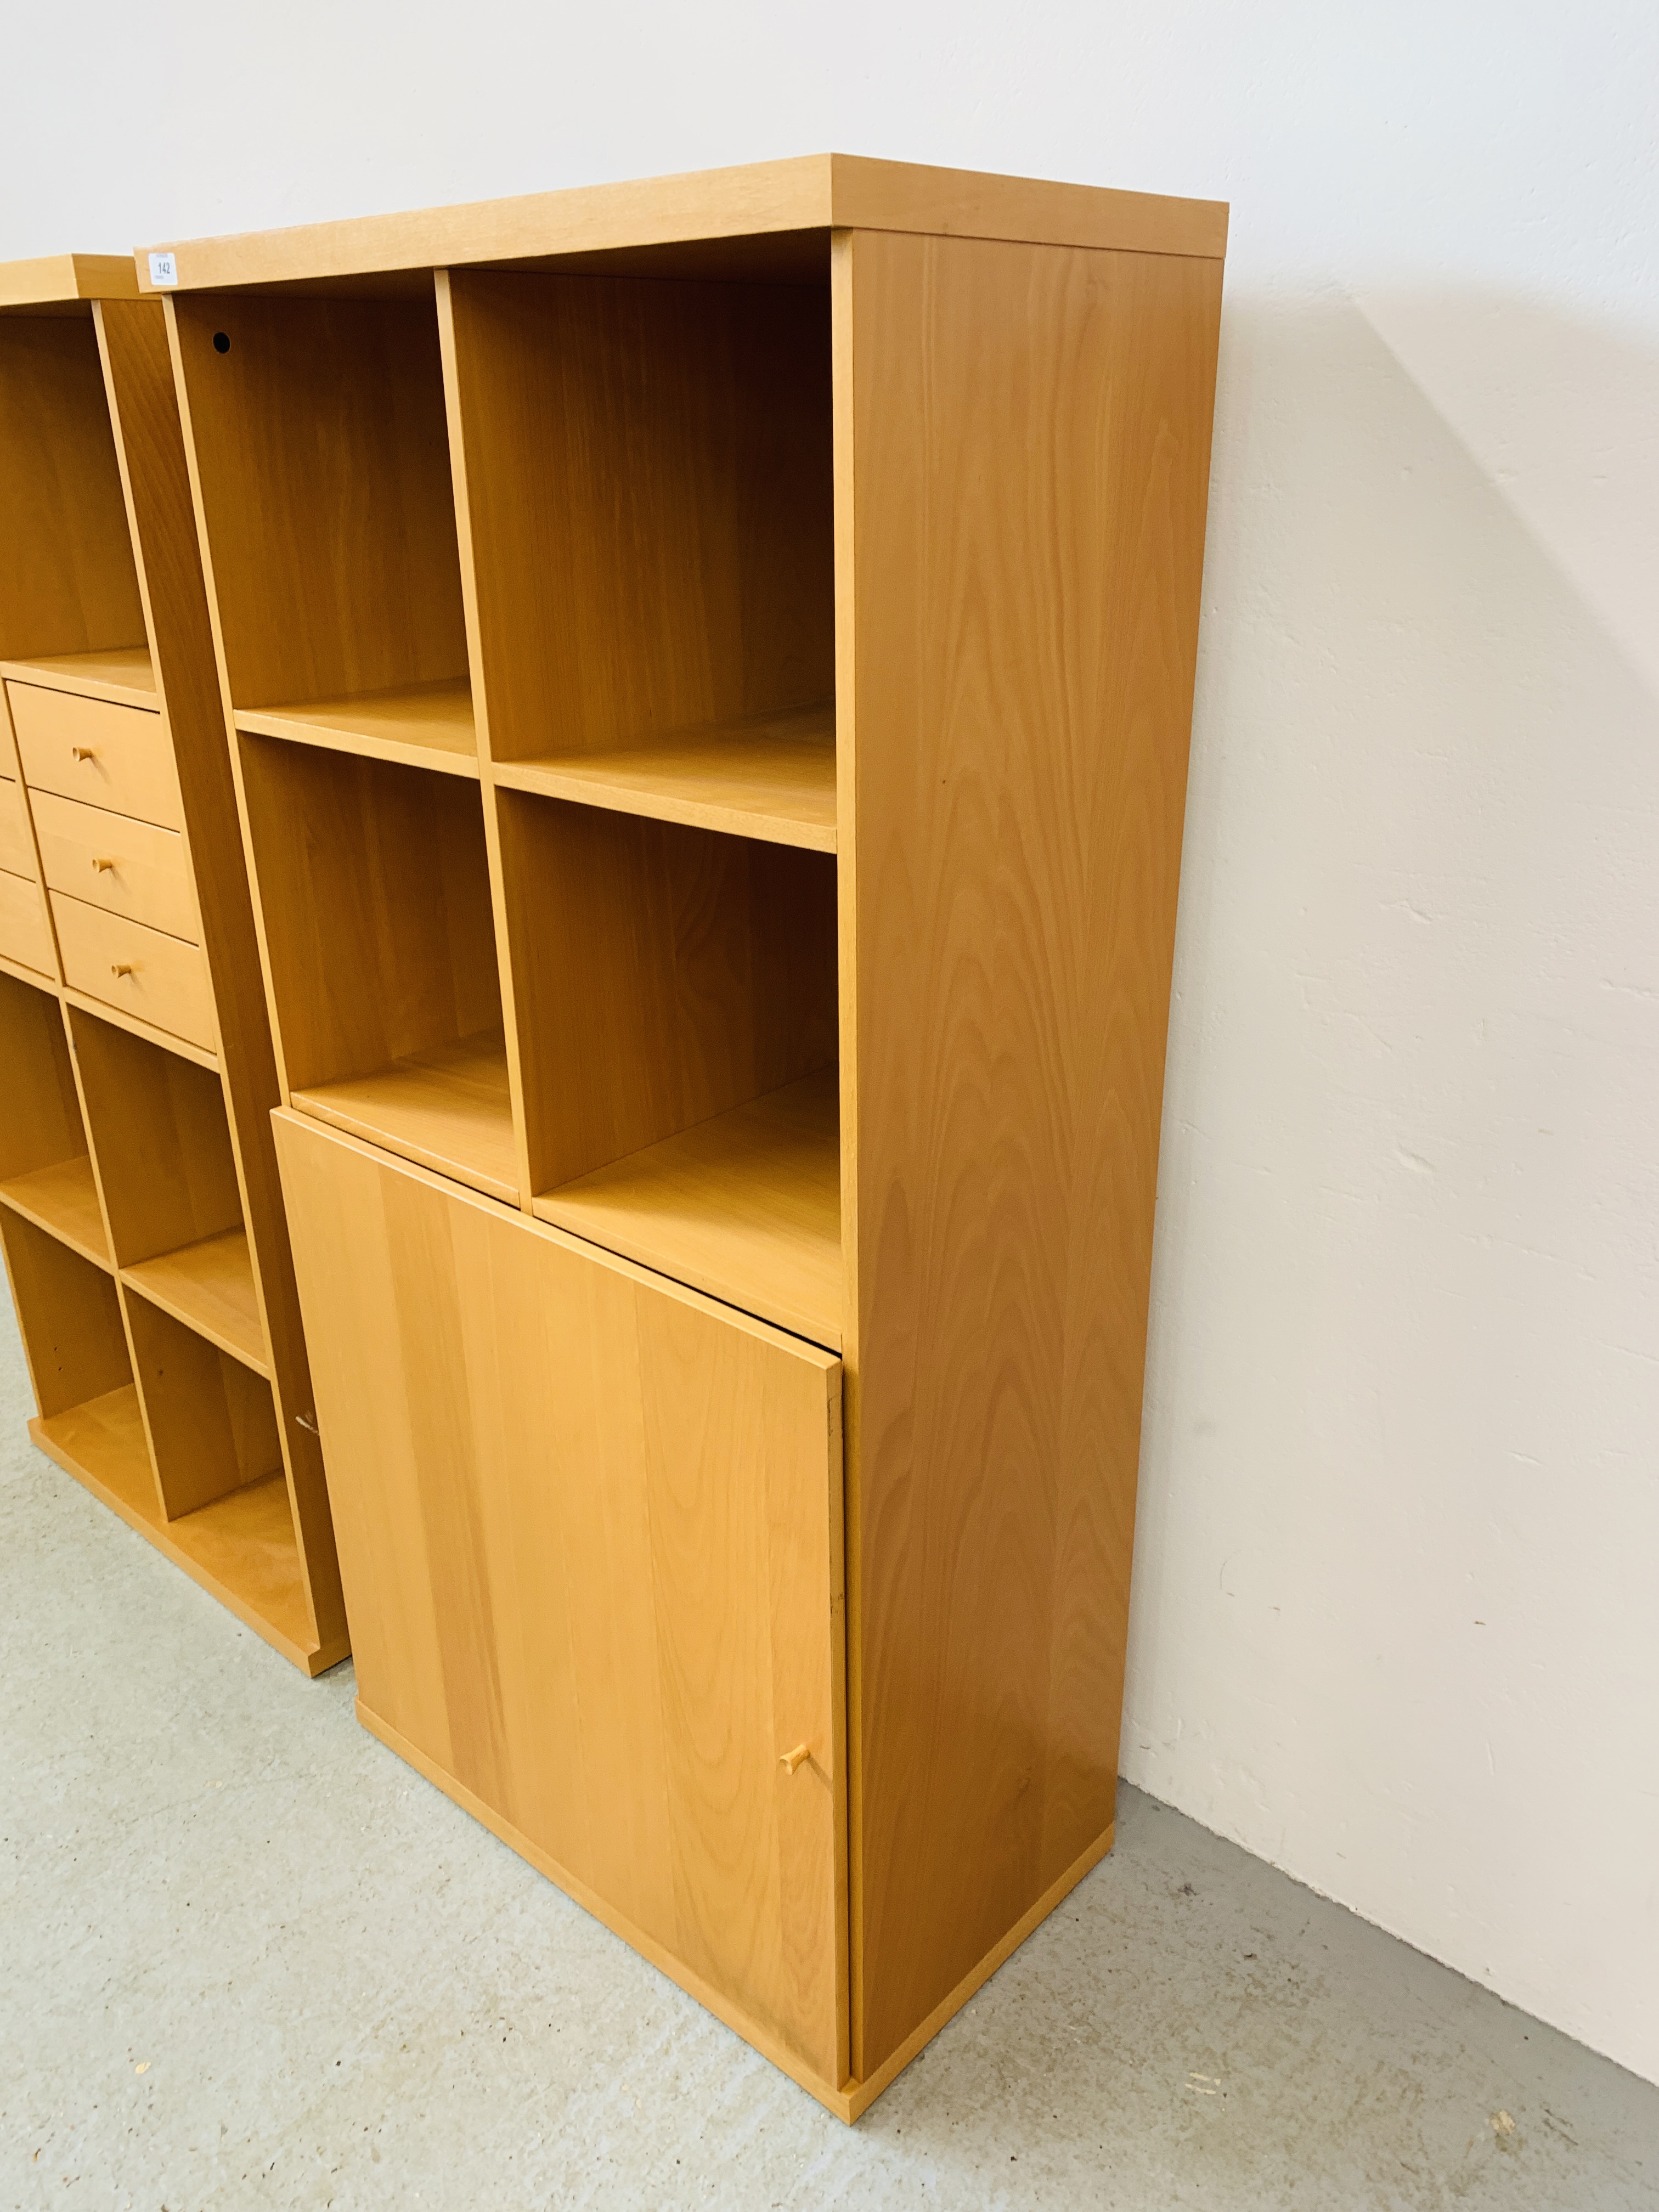 TWO MODERN BEECHWOOD FINISH HOME STORAGE UNITS EACH WIDTH 72CM. DEPTH 42CM. HEIGHT 146CM. - Image 2 of 9